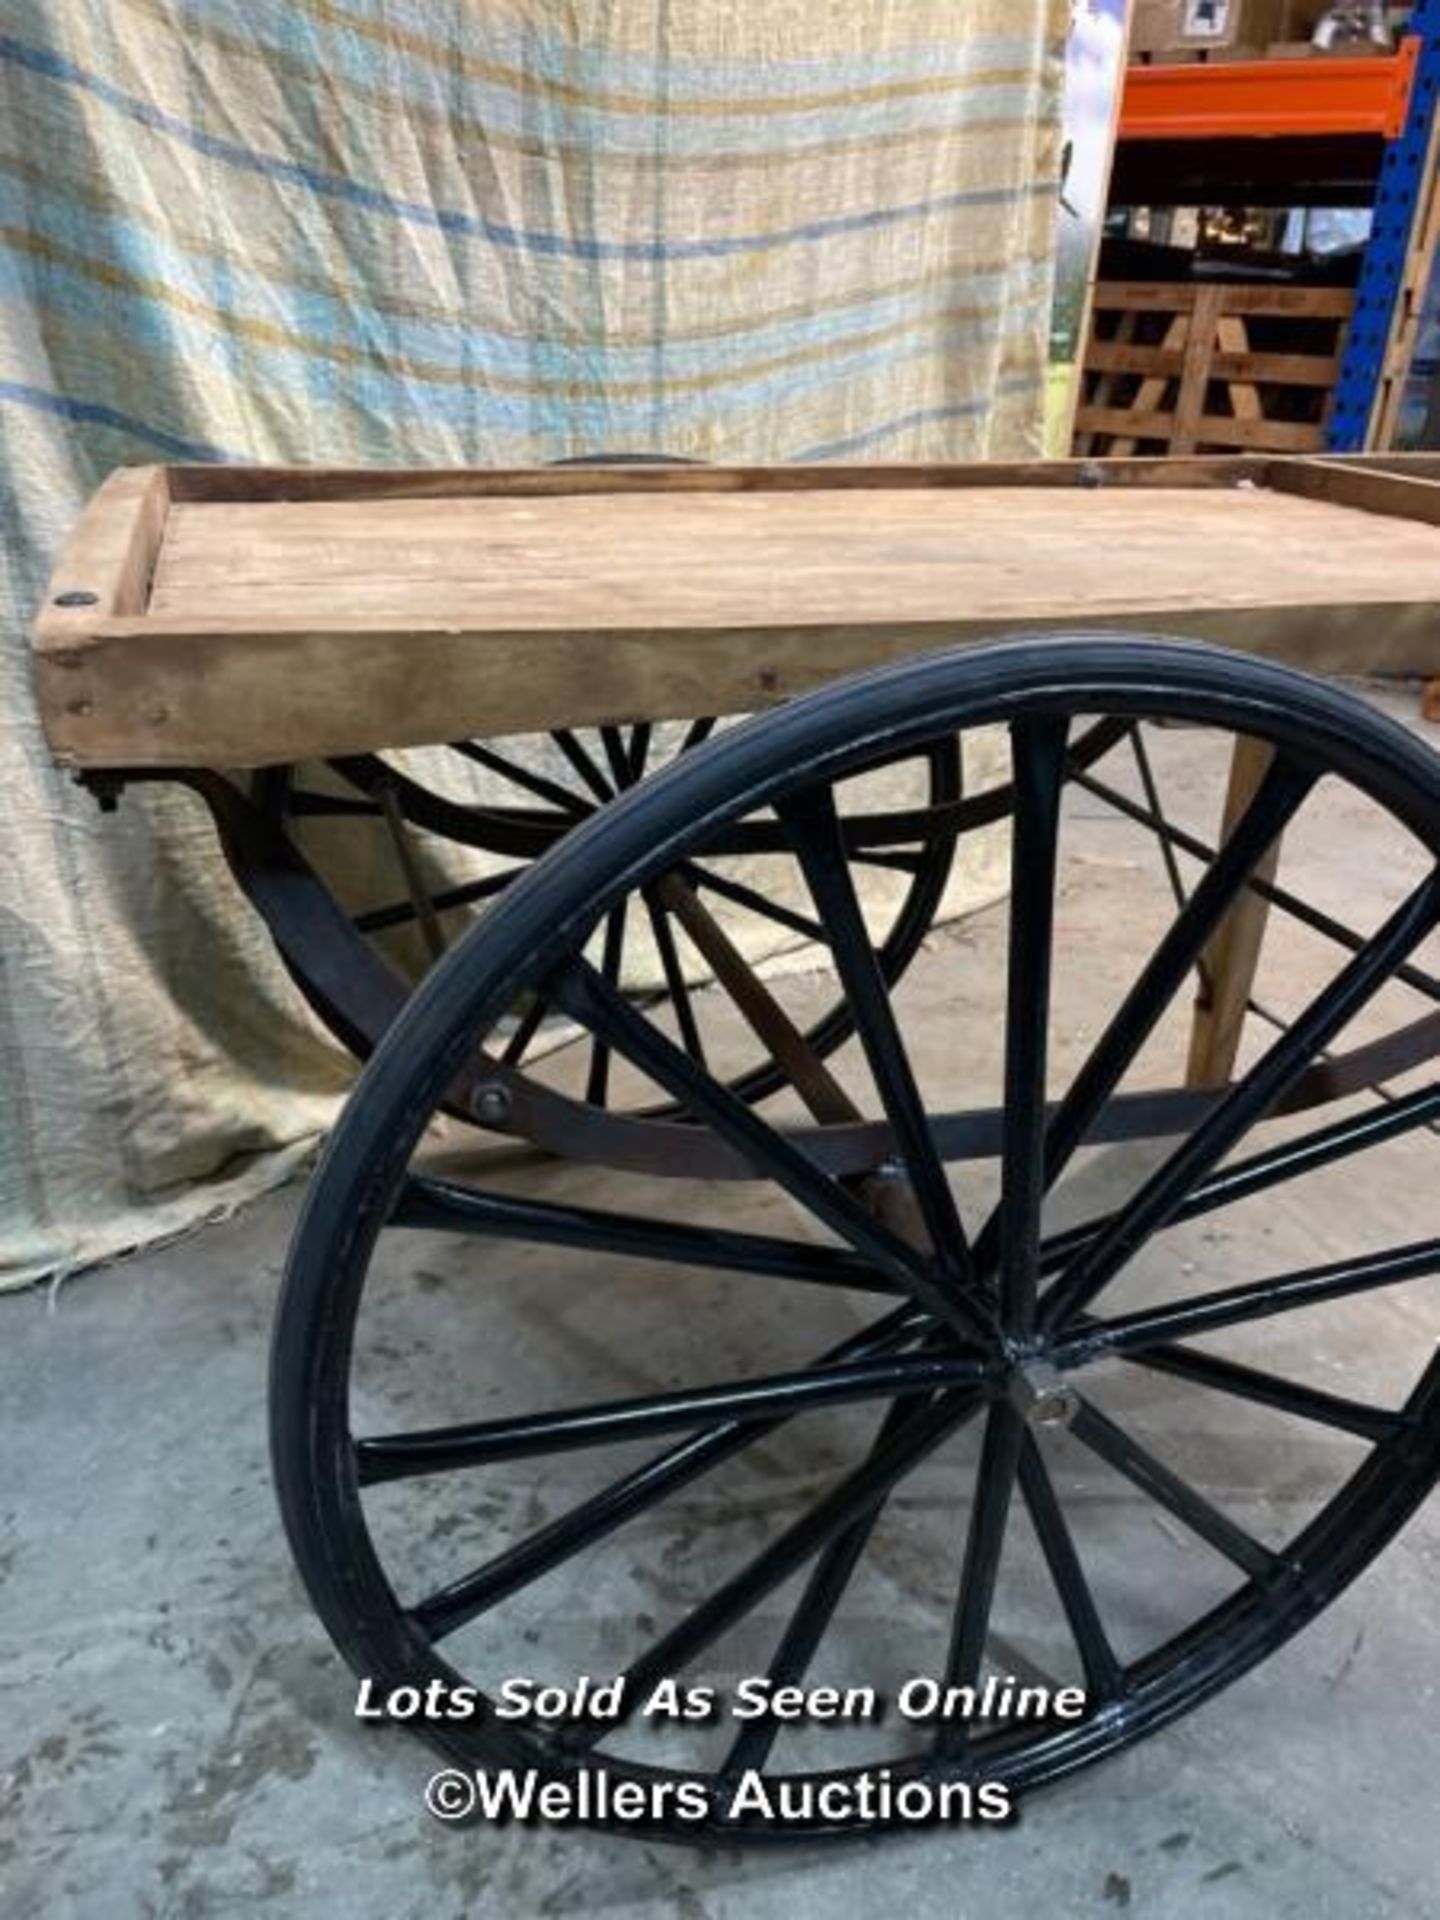 *TRADERS 2 WHEEL BARROW, BED 100CM (L) X 65CM (H), WHEELS 68CM (DIA) / COLLECTION LOCATION: - Image 2 of 4